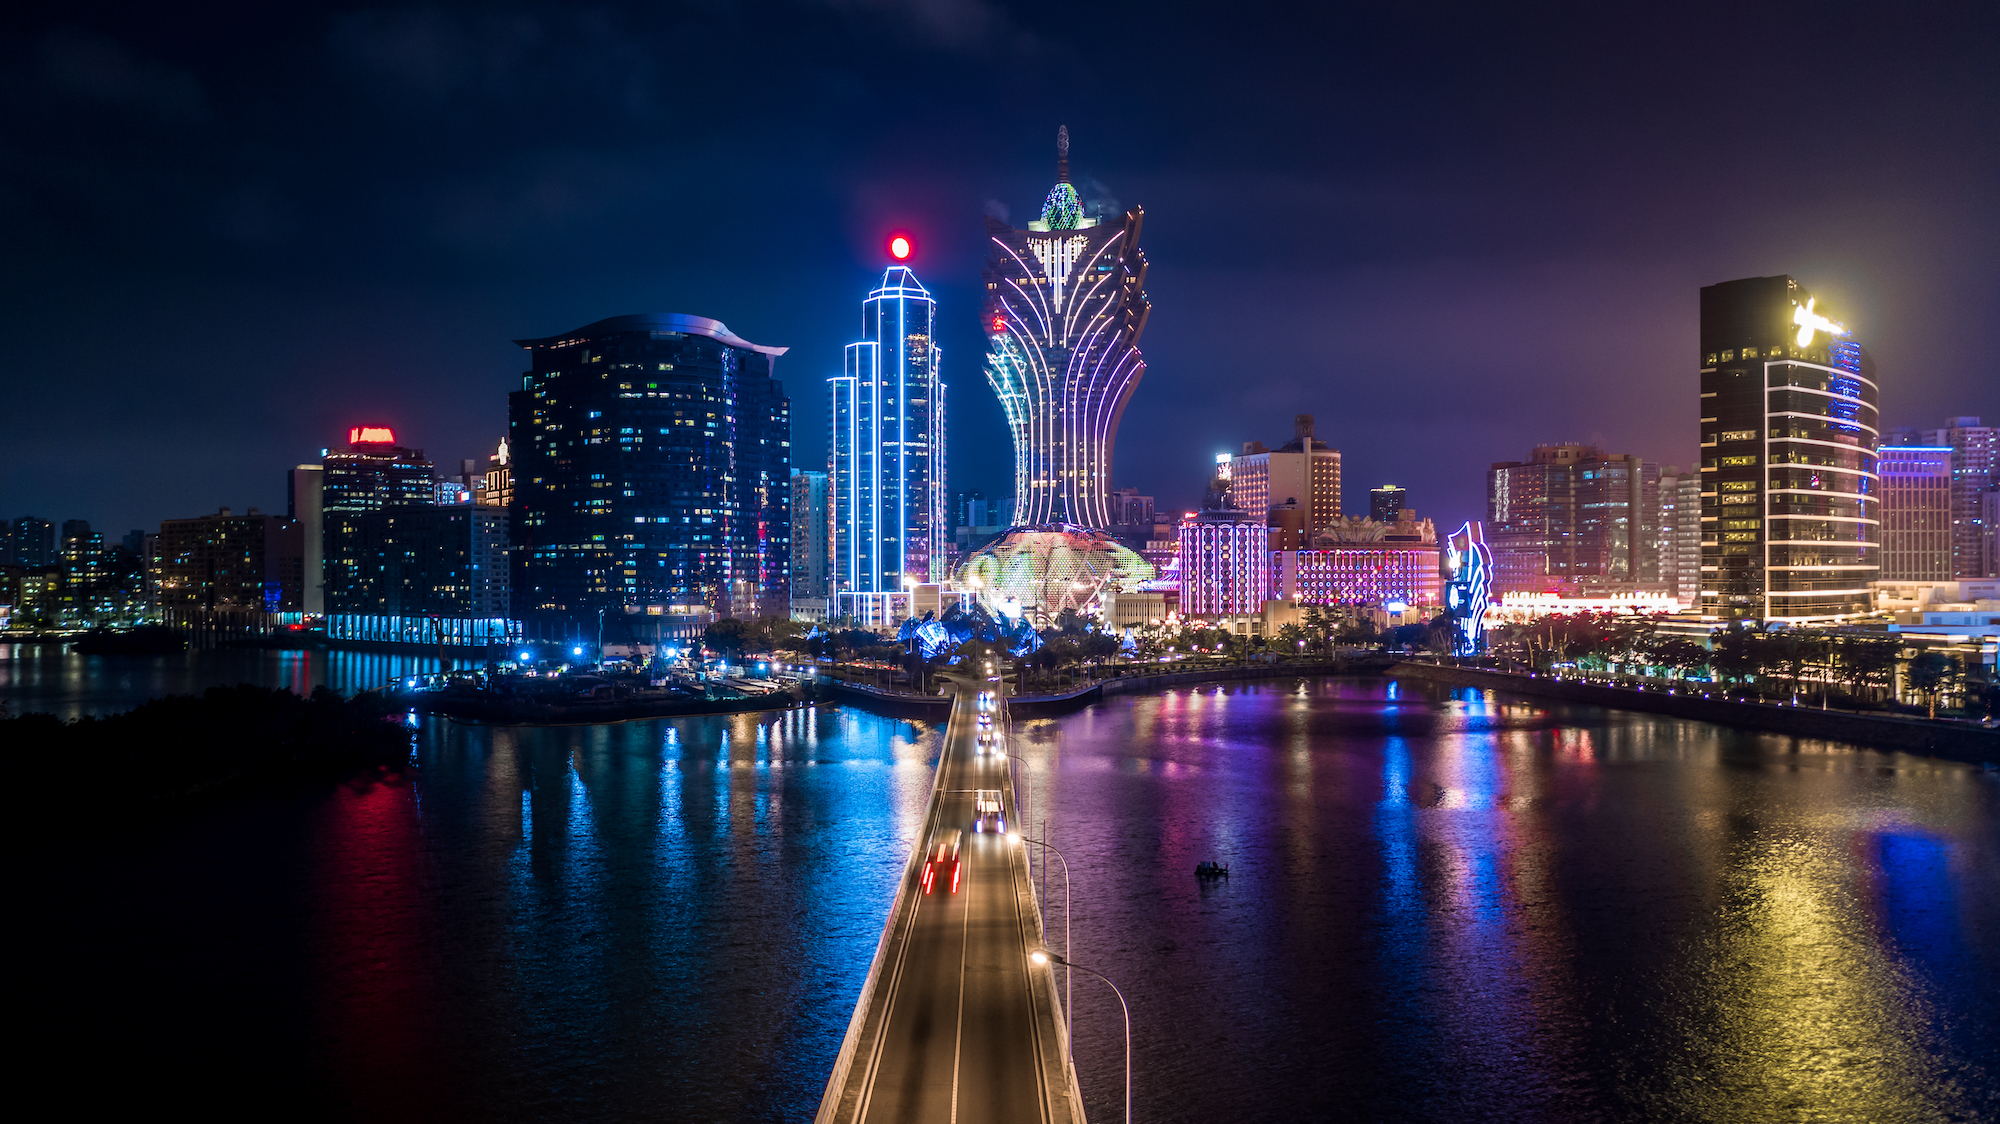 A festival of illumination comes to Macao for the next three months